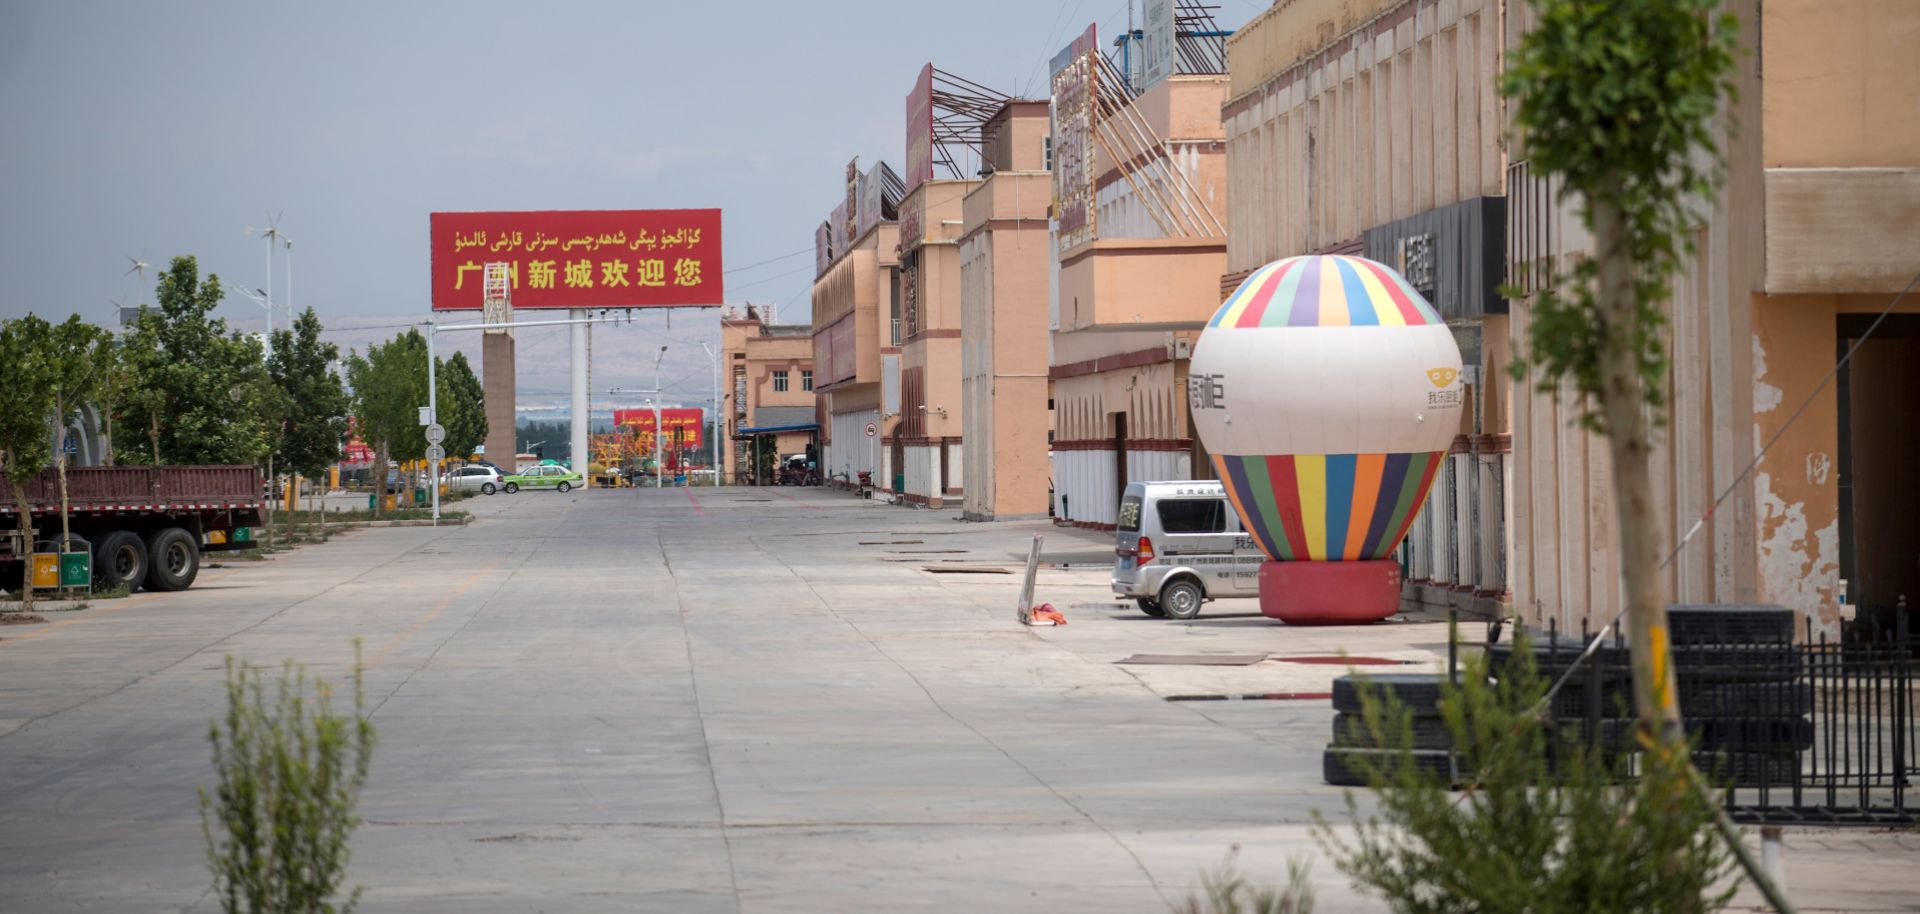 Beijing is promising underdeveloped regions such as Xinjiang that starting next year it will cover 80 percent of the costs associated with many public services.